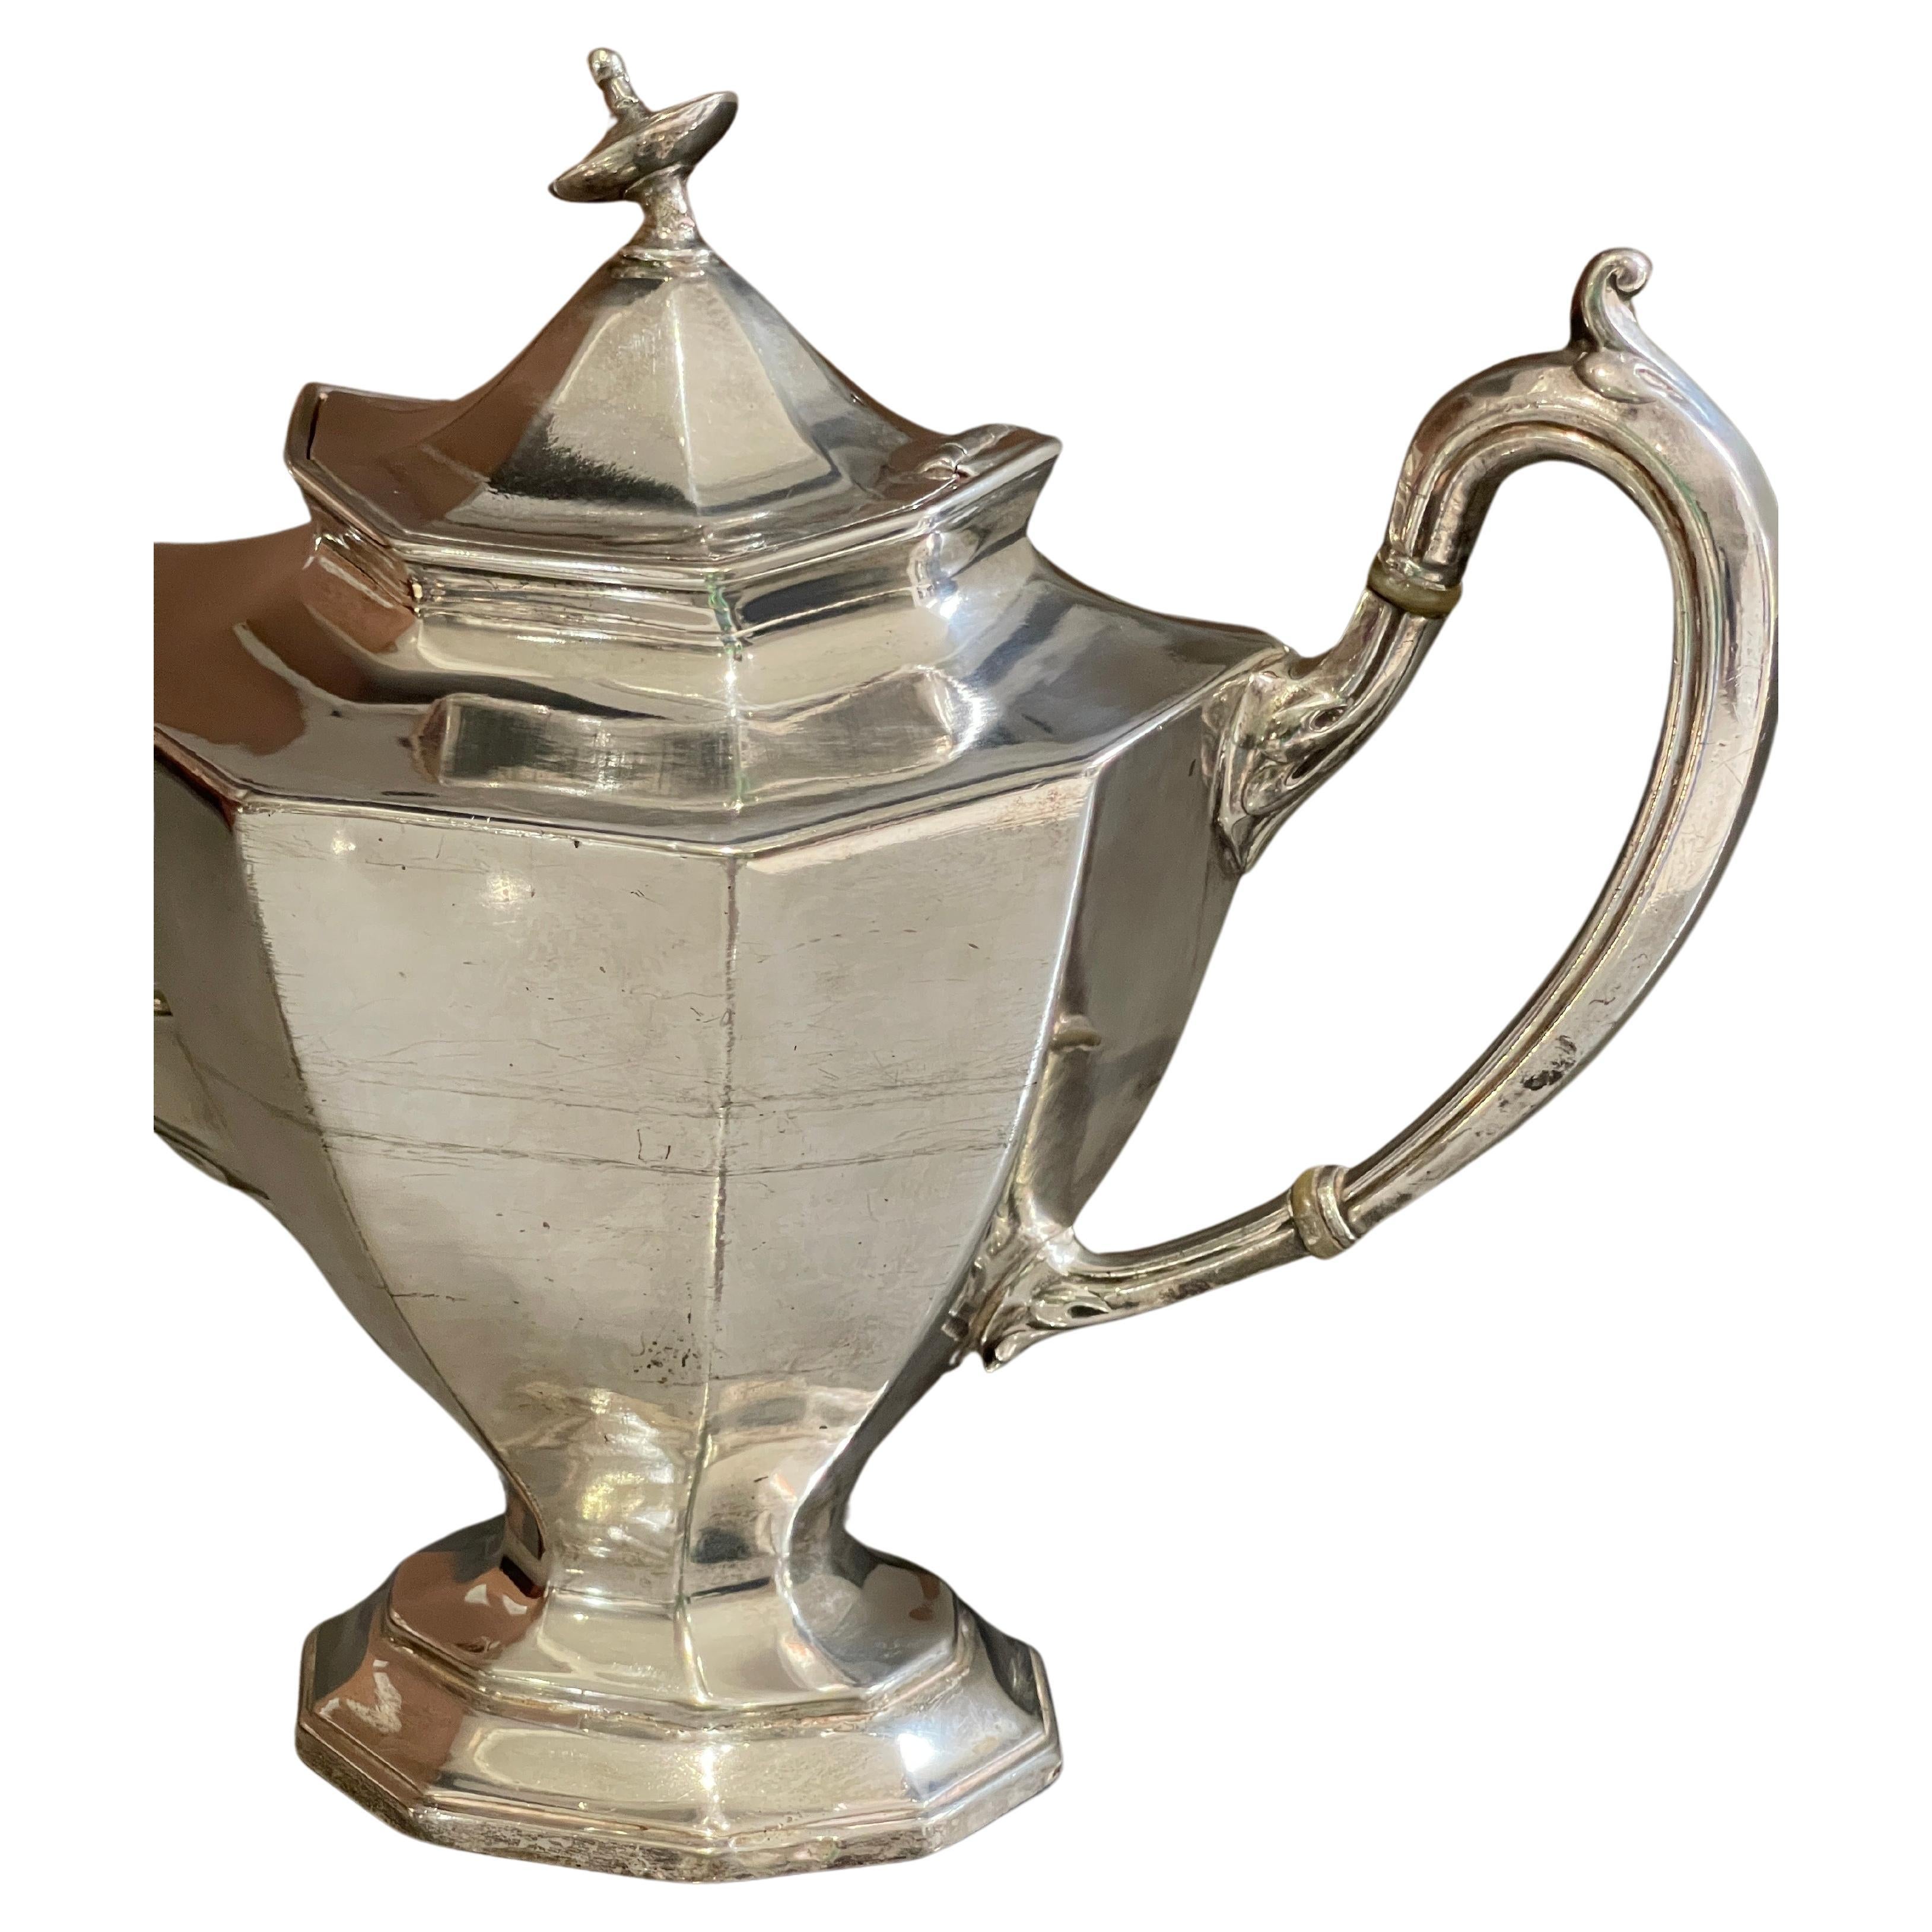 An antique Art Deco tea set and silver-plated teapot beautifully designed and created suit elegant serving. With lid pressed, cast and chased vaulted lid.
Coffee pot, Height 22 cm. Signed by Reed & Barton.
Well-rounded decor.

Condition
Complete